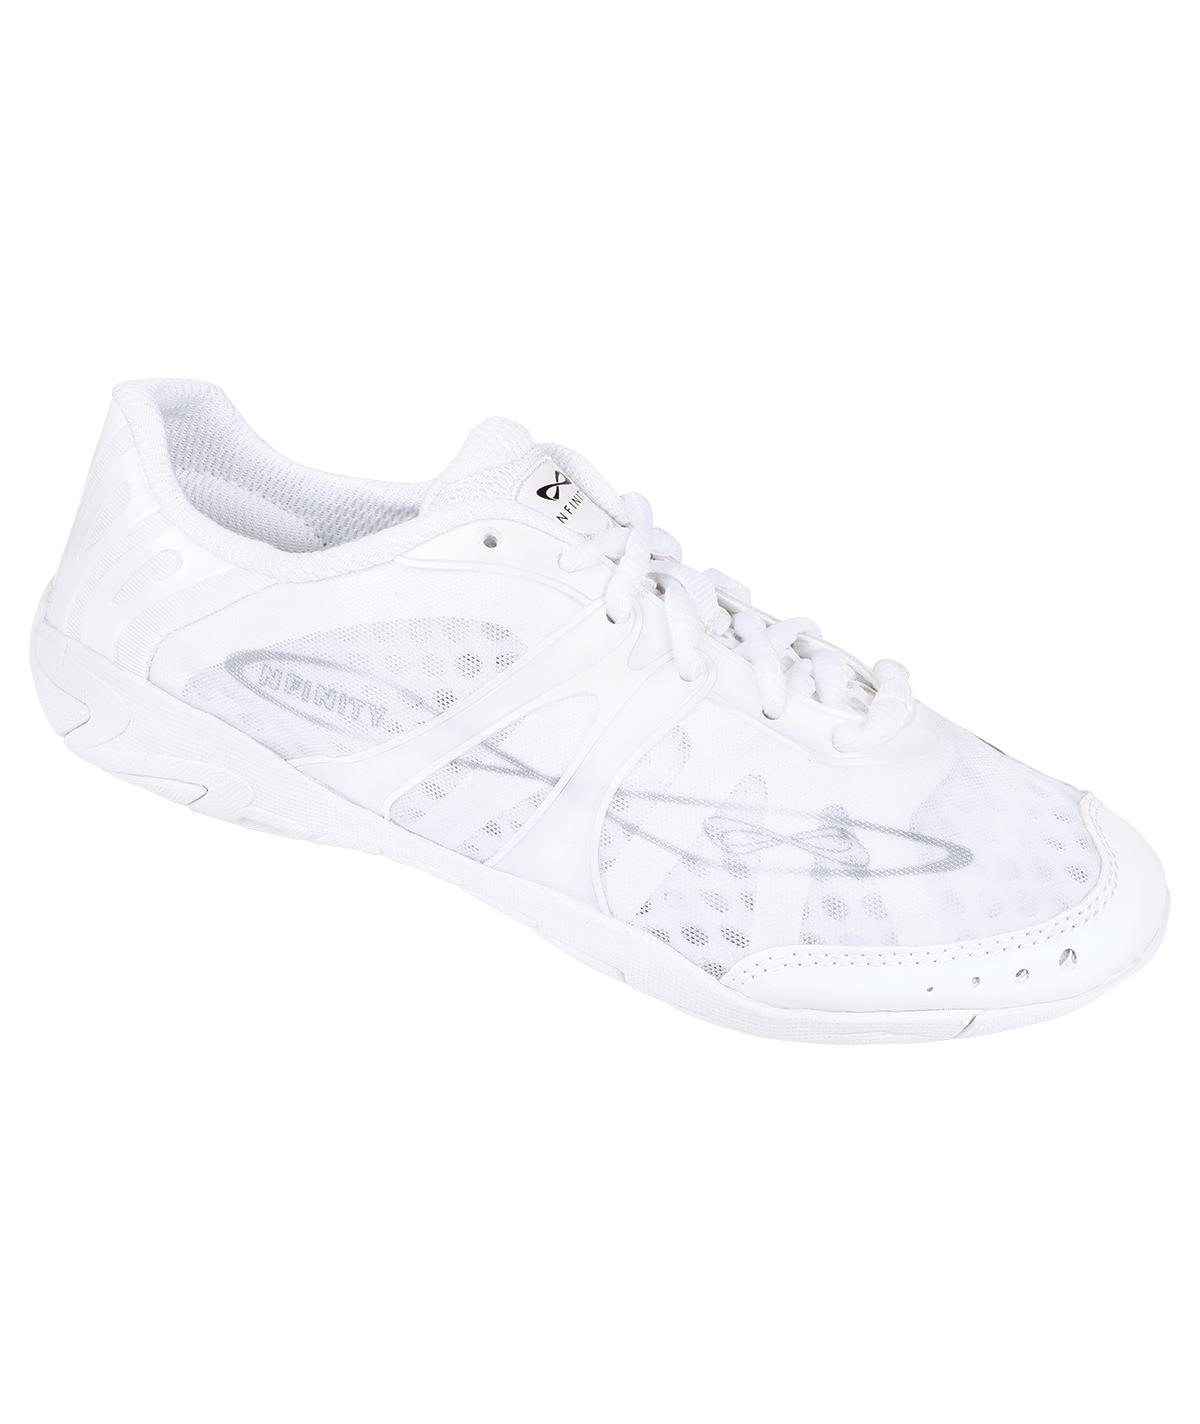 Buy Chasse Ace II Youth Cheerleading Shoes - White Cheer Shoes For Girls  online | Topofstyle